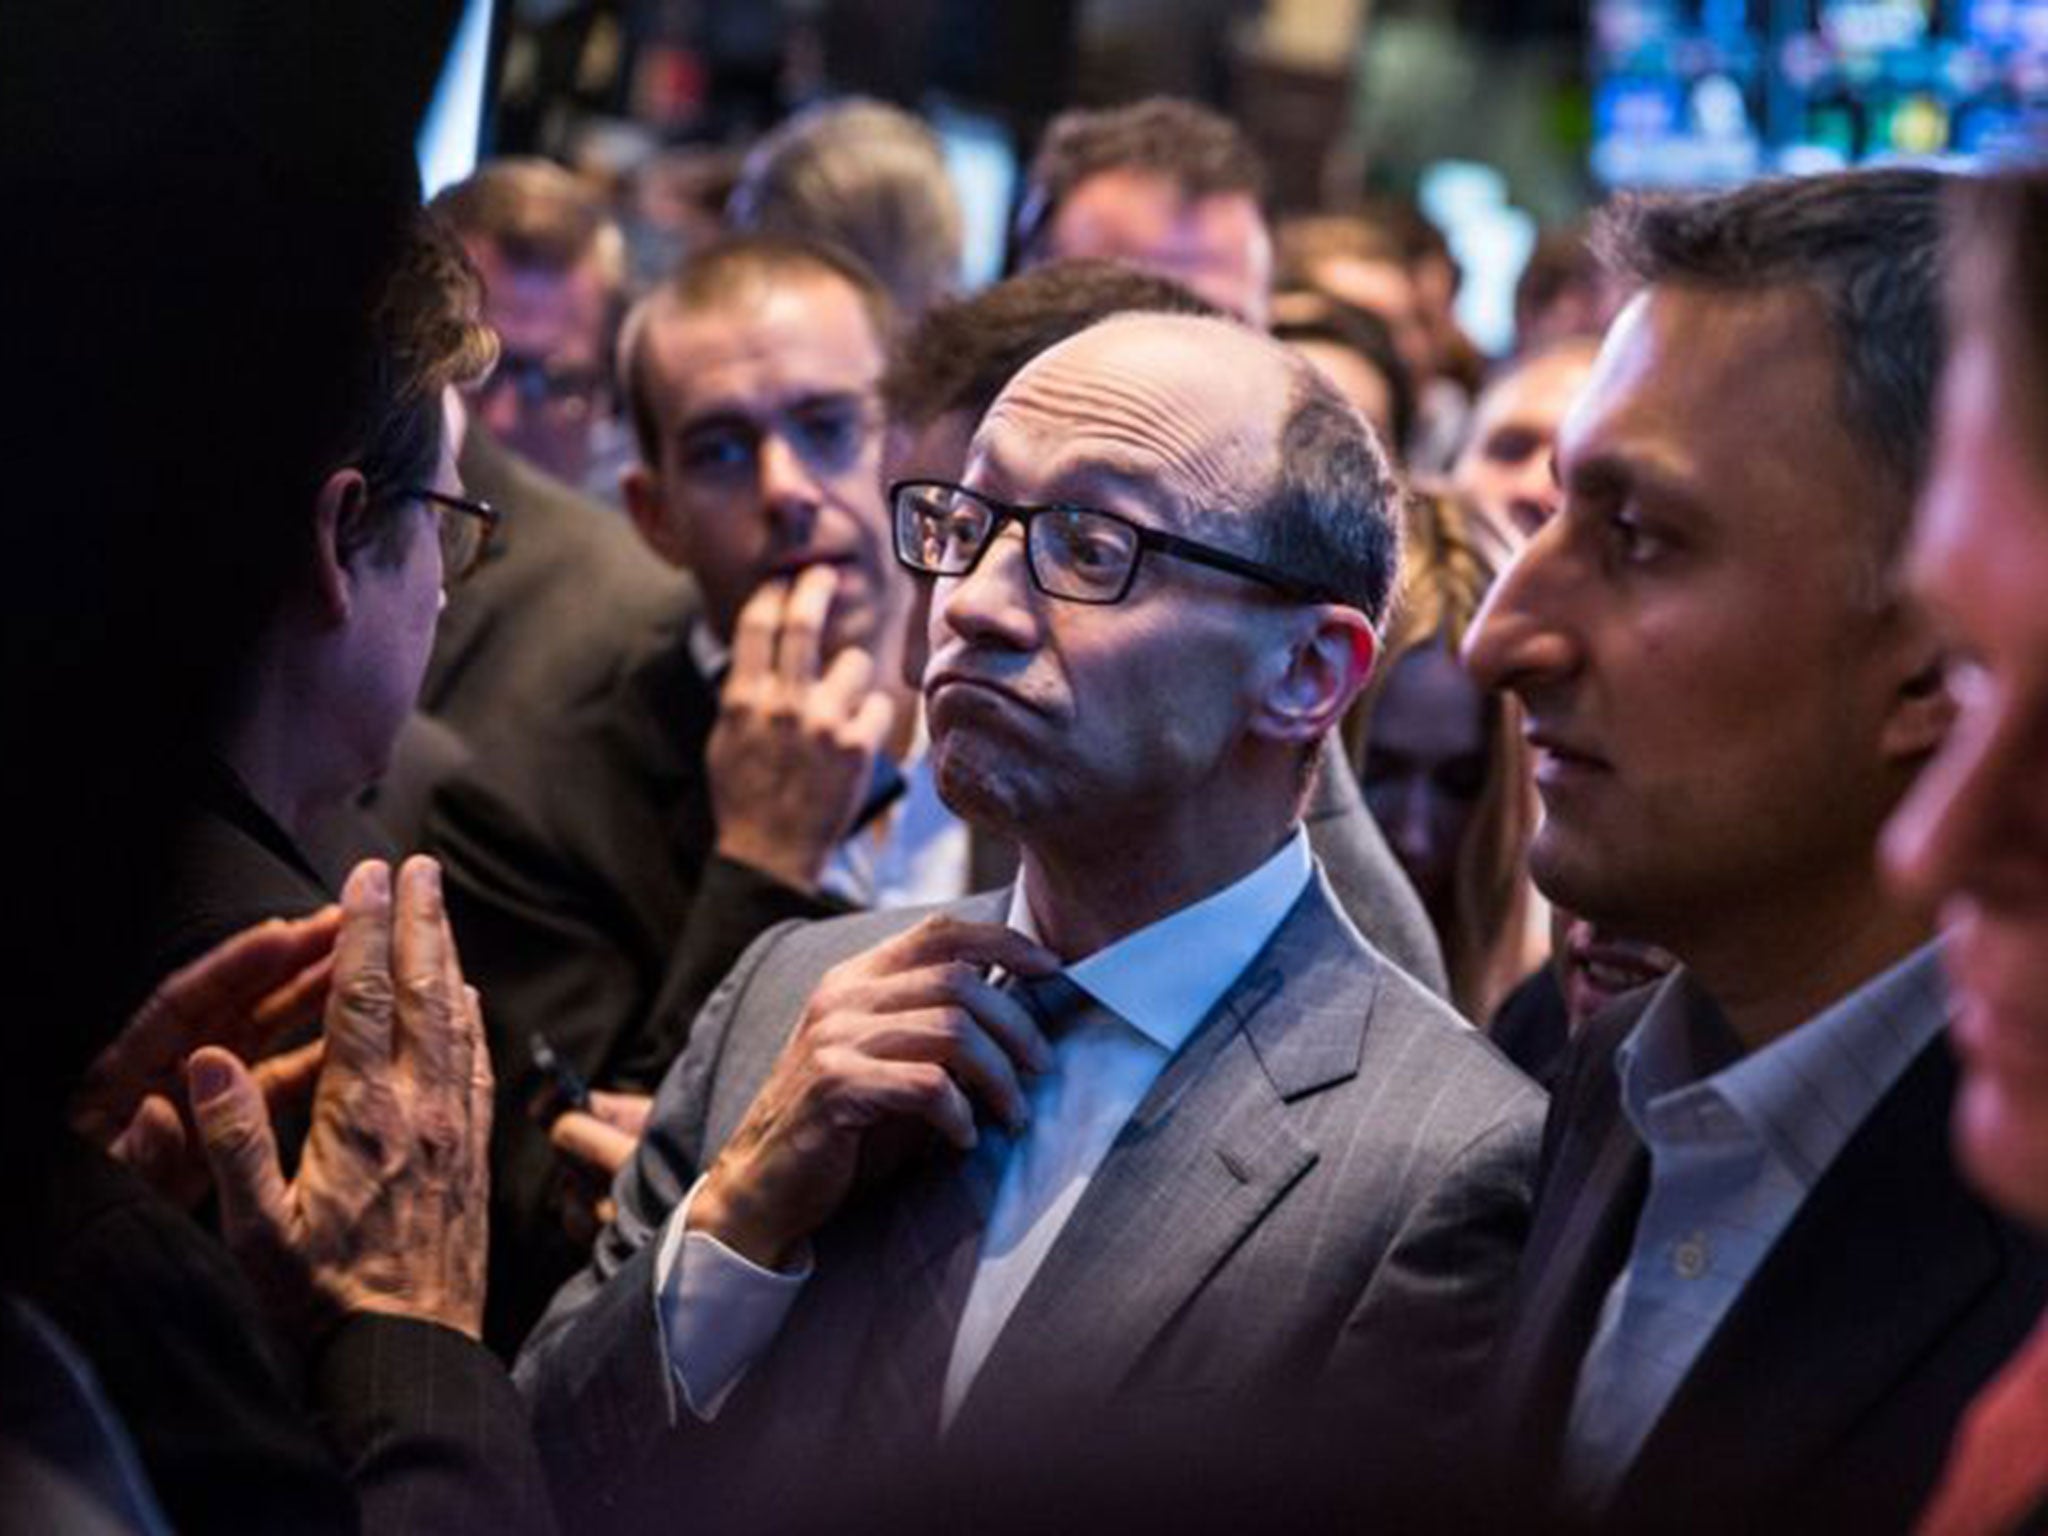 Investors were unhappy with Dick Costolo (centre), but industry analysts say his options were limited